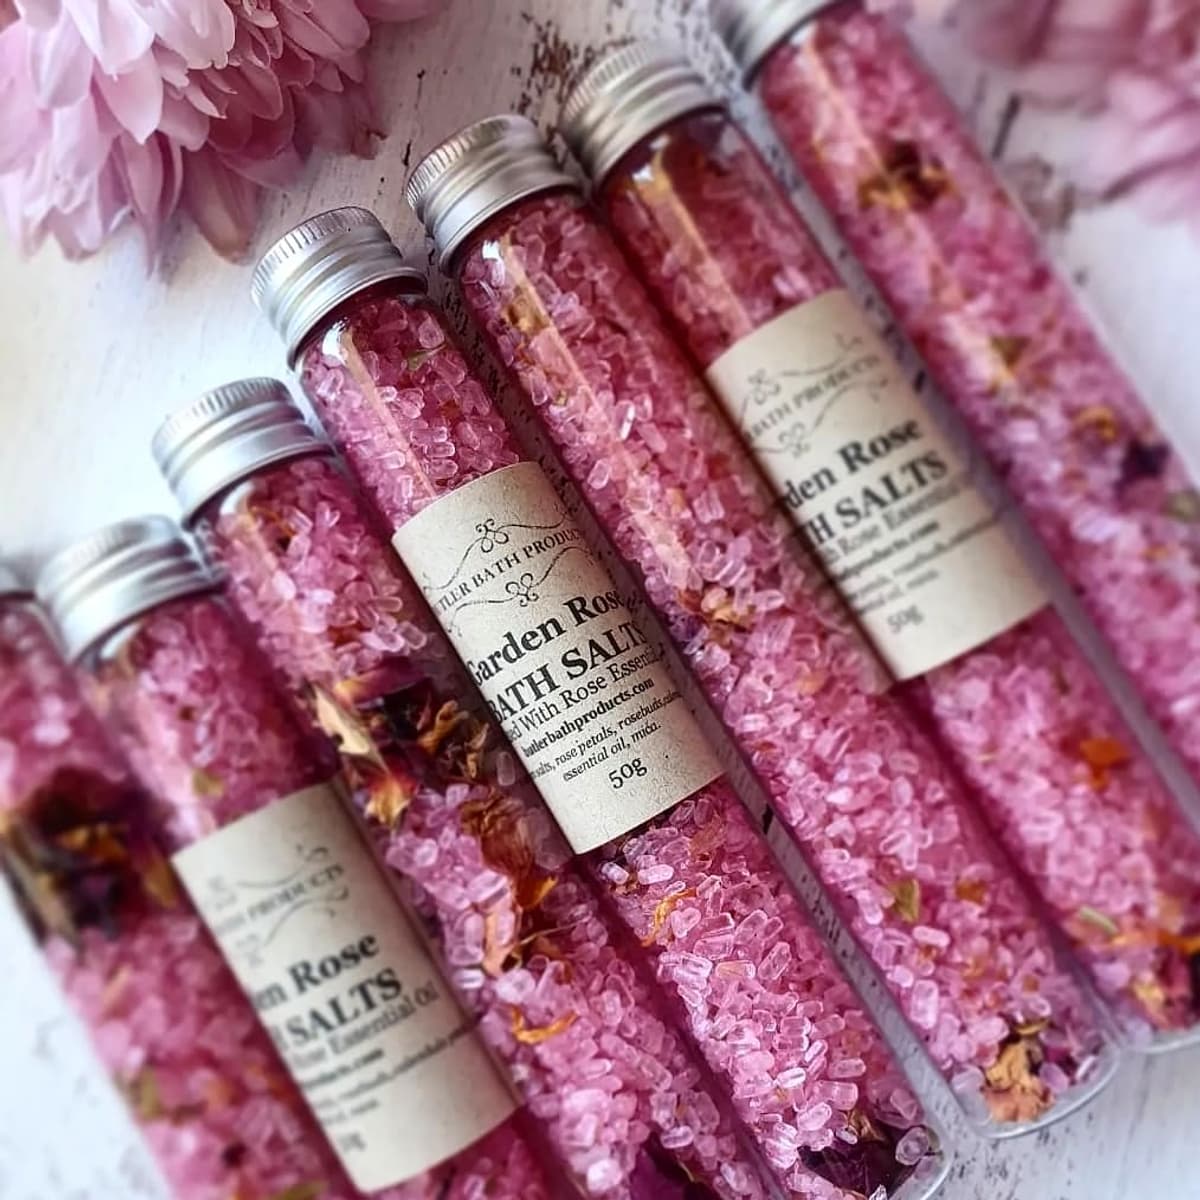 Add these cute bath salts to your gift box delivery in Melbourne. No matter the occasion, any hamper or gift box will be better off with these tucked inside!